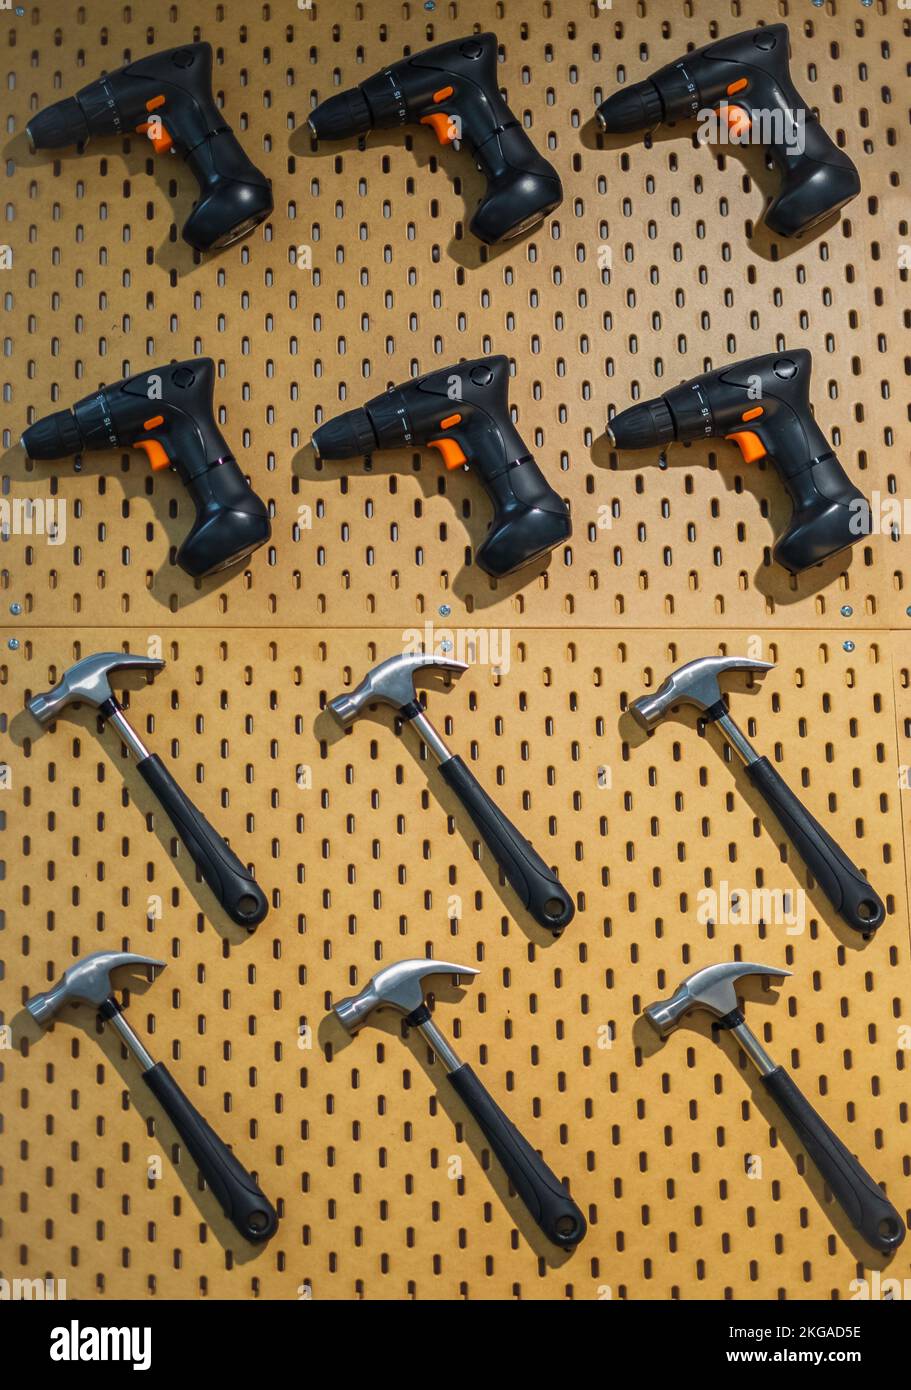 Carpentry tools hanging on the wall. Workshop scene. New tools hanging on wall in workshop, Tool on the wall, vintage garage style Stock Photo